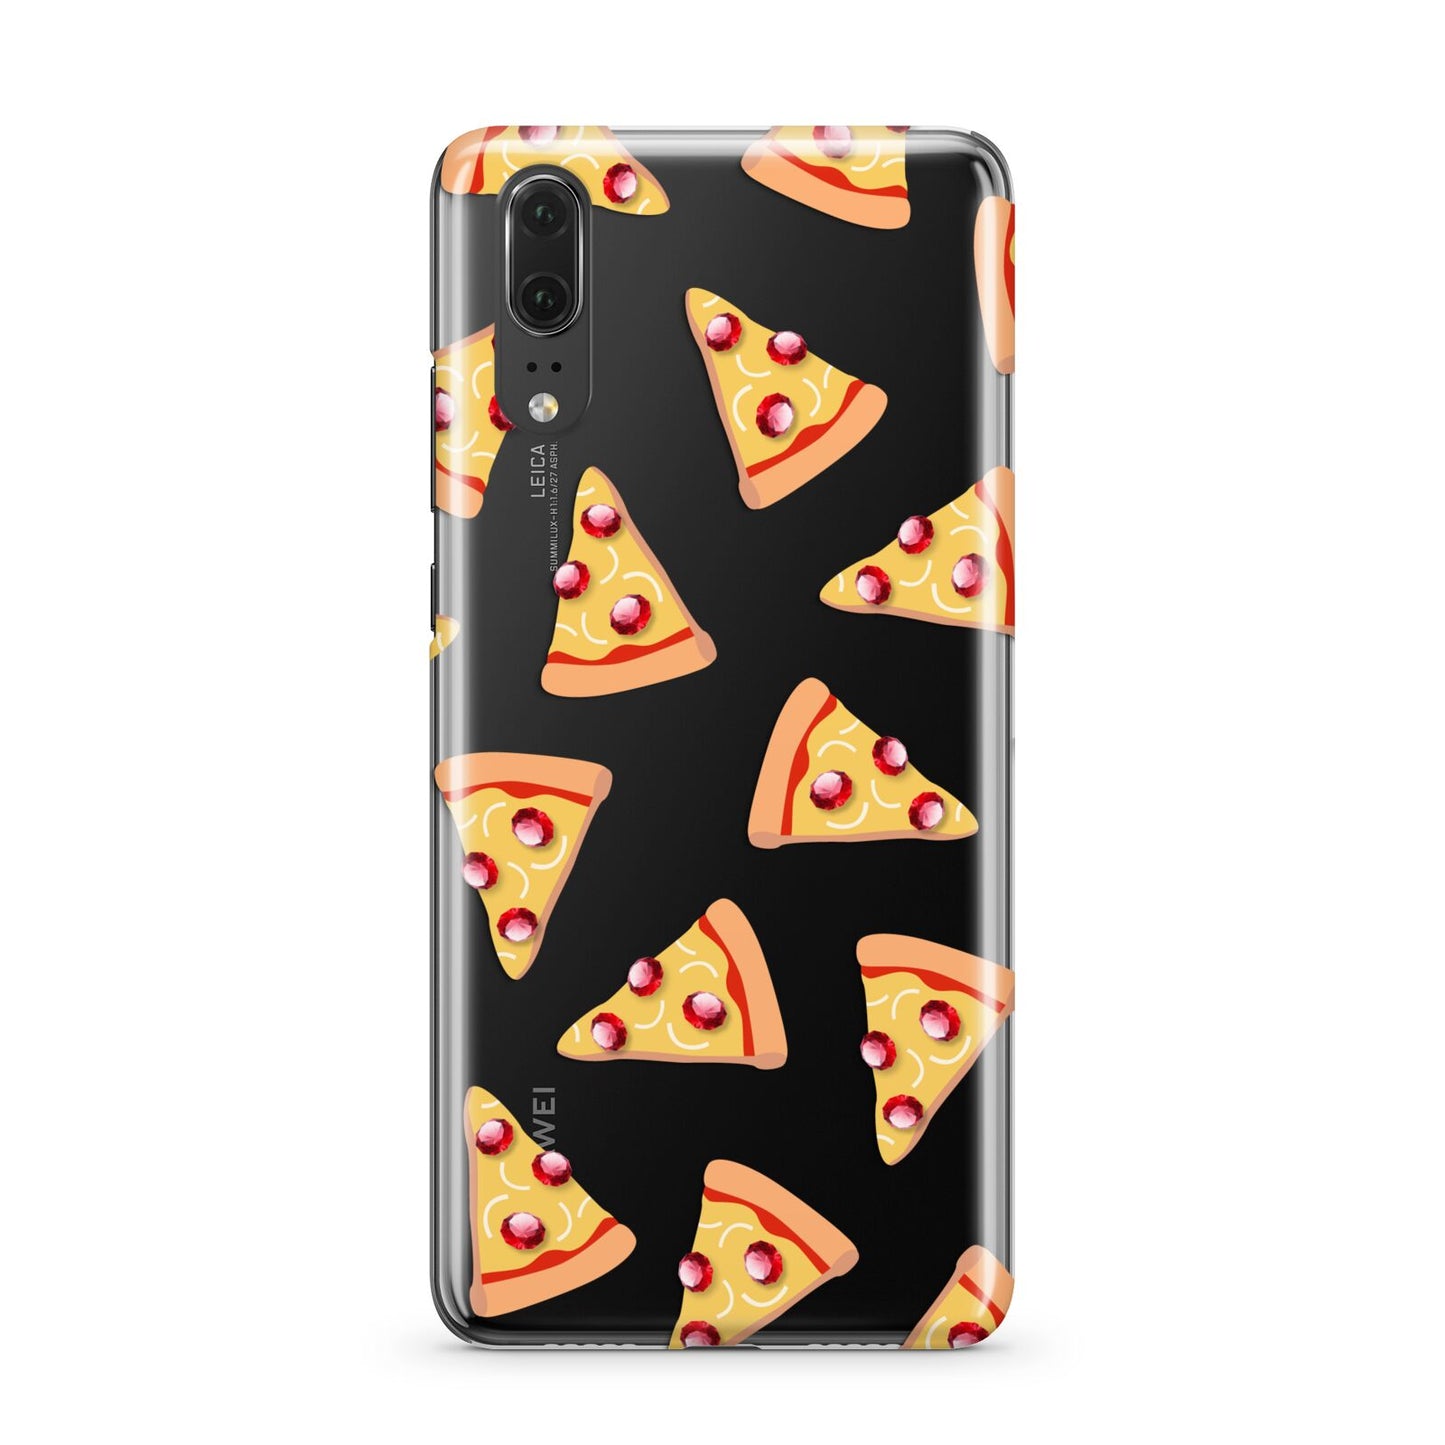 Rubies on Cartoon Pizza Slices Huawei P20 Phone Case